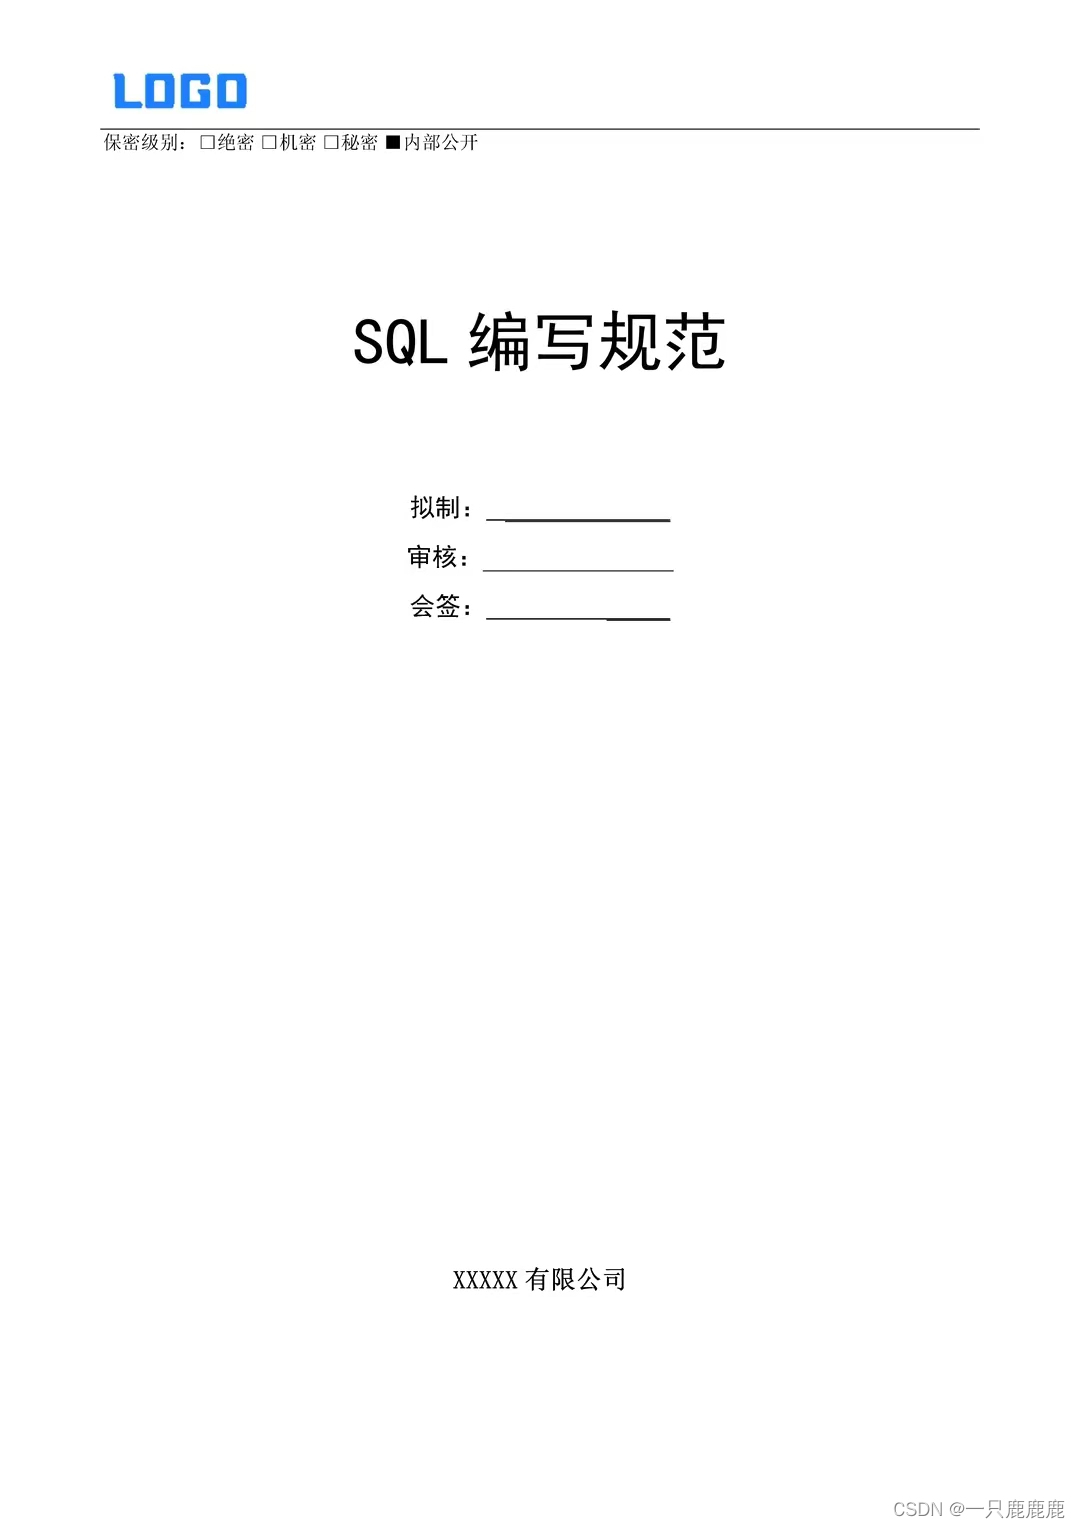 sql编写<span style='color:red;'>规范</span>（<span style='color:red;'>word</span><span style='color:red;'>原件</span>）